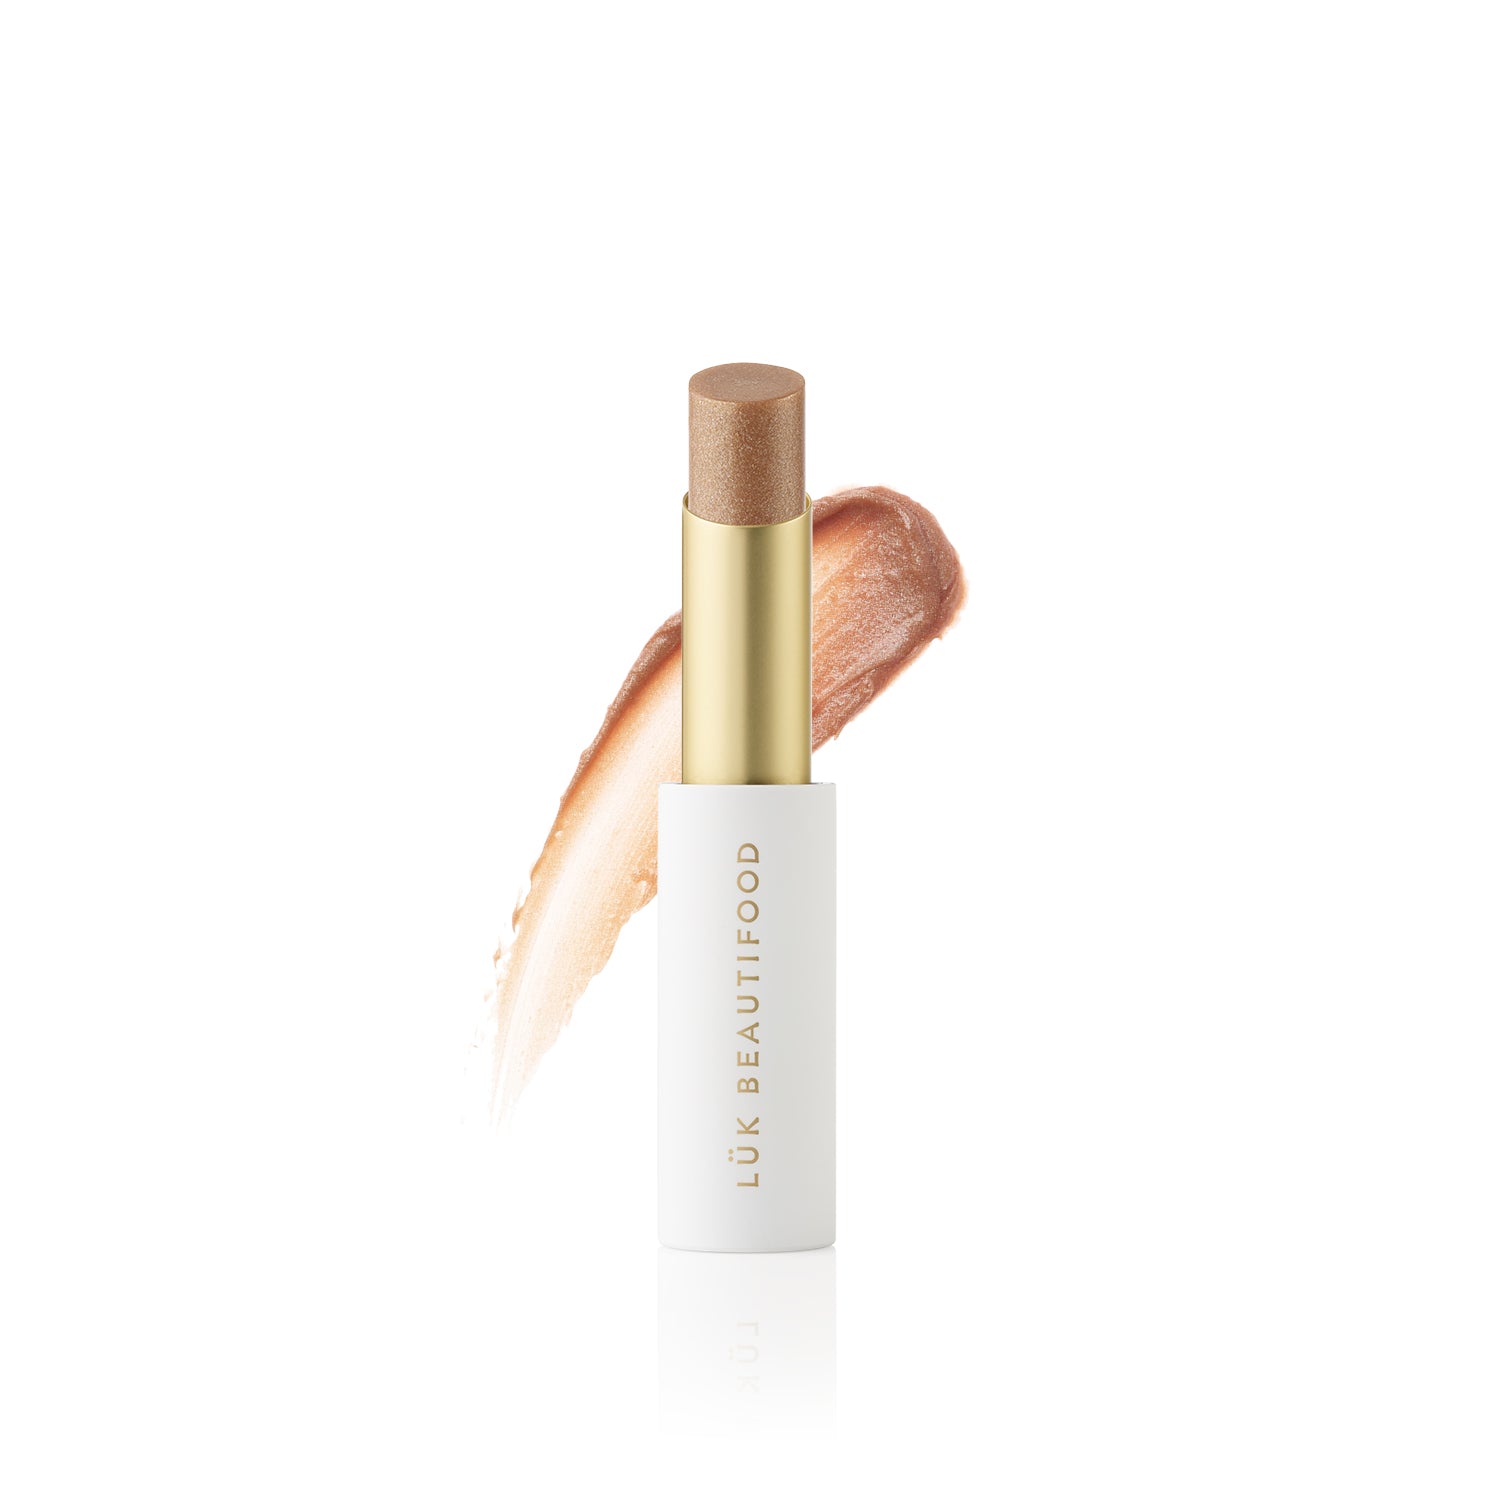 Lip Nourish Chai Shimmer - Golden beige. Soft touch, magnetic close Stick and swatch. Tastes of delicious chai tea. 100% Natural Lipstick